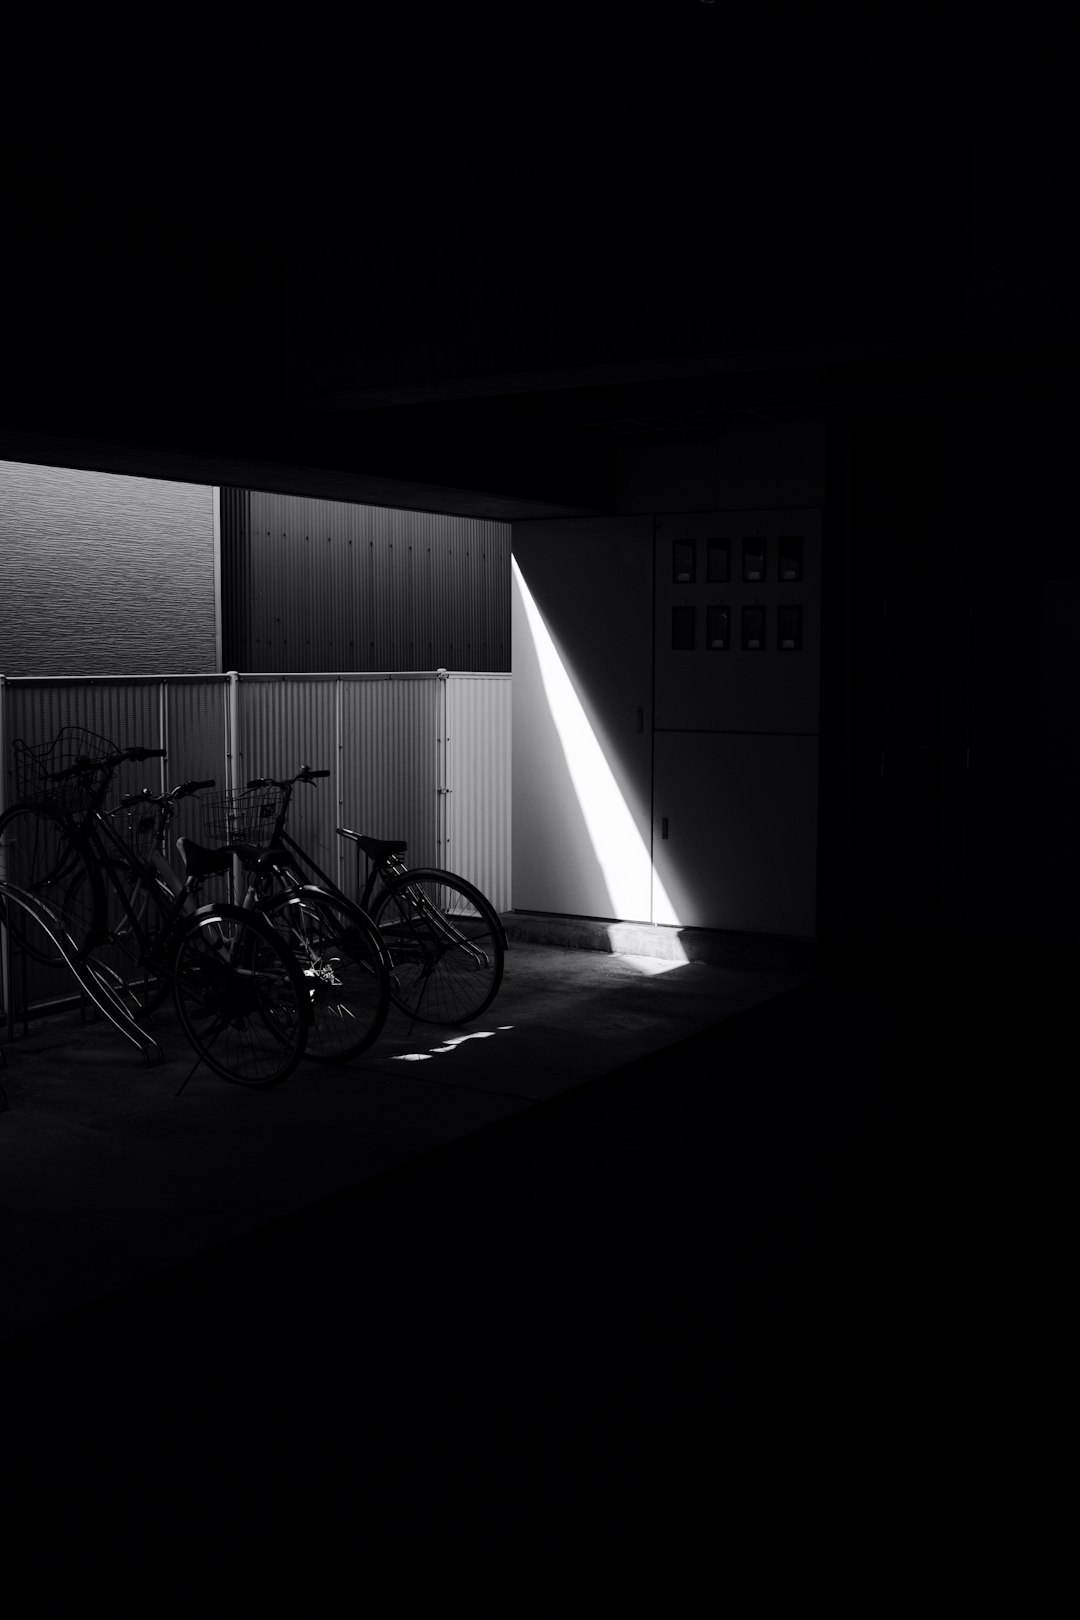 grayscale photo of bicycle in room